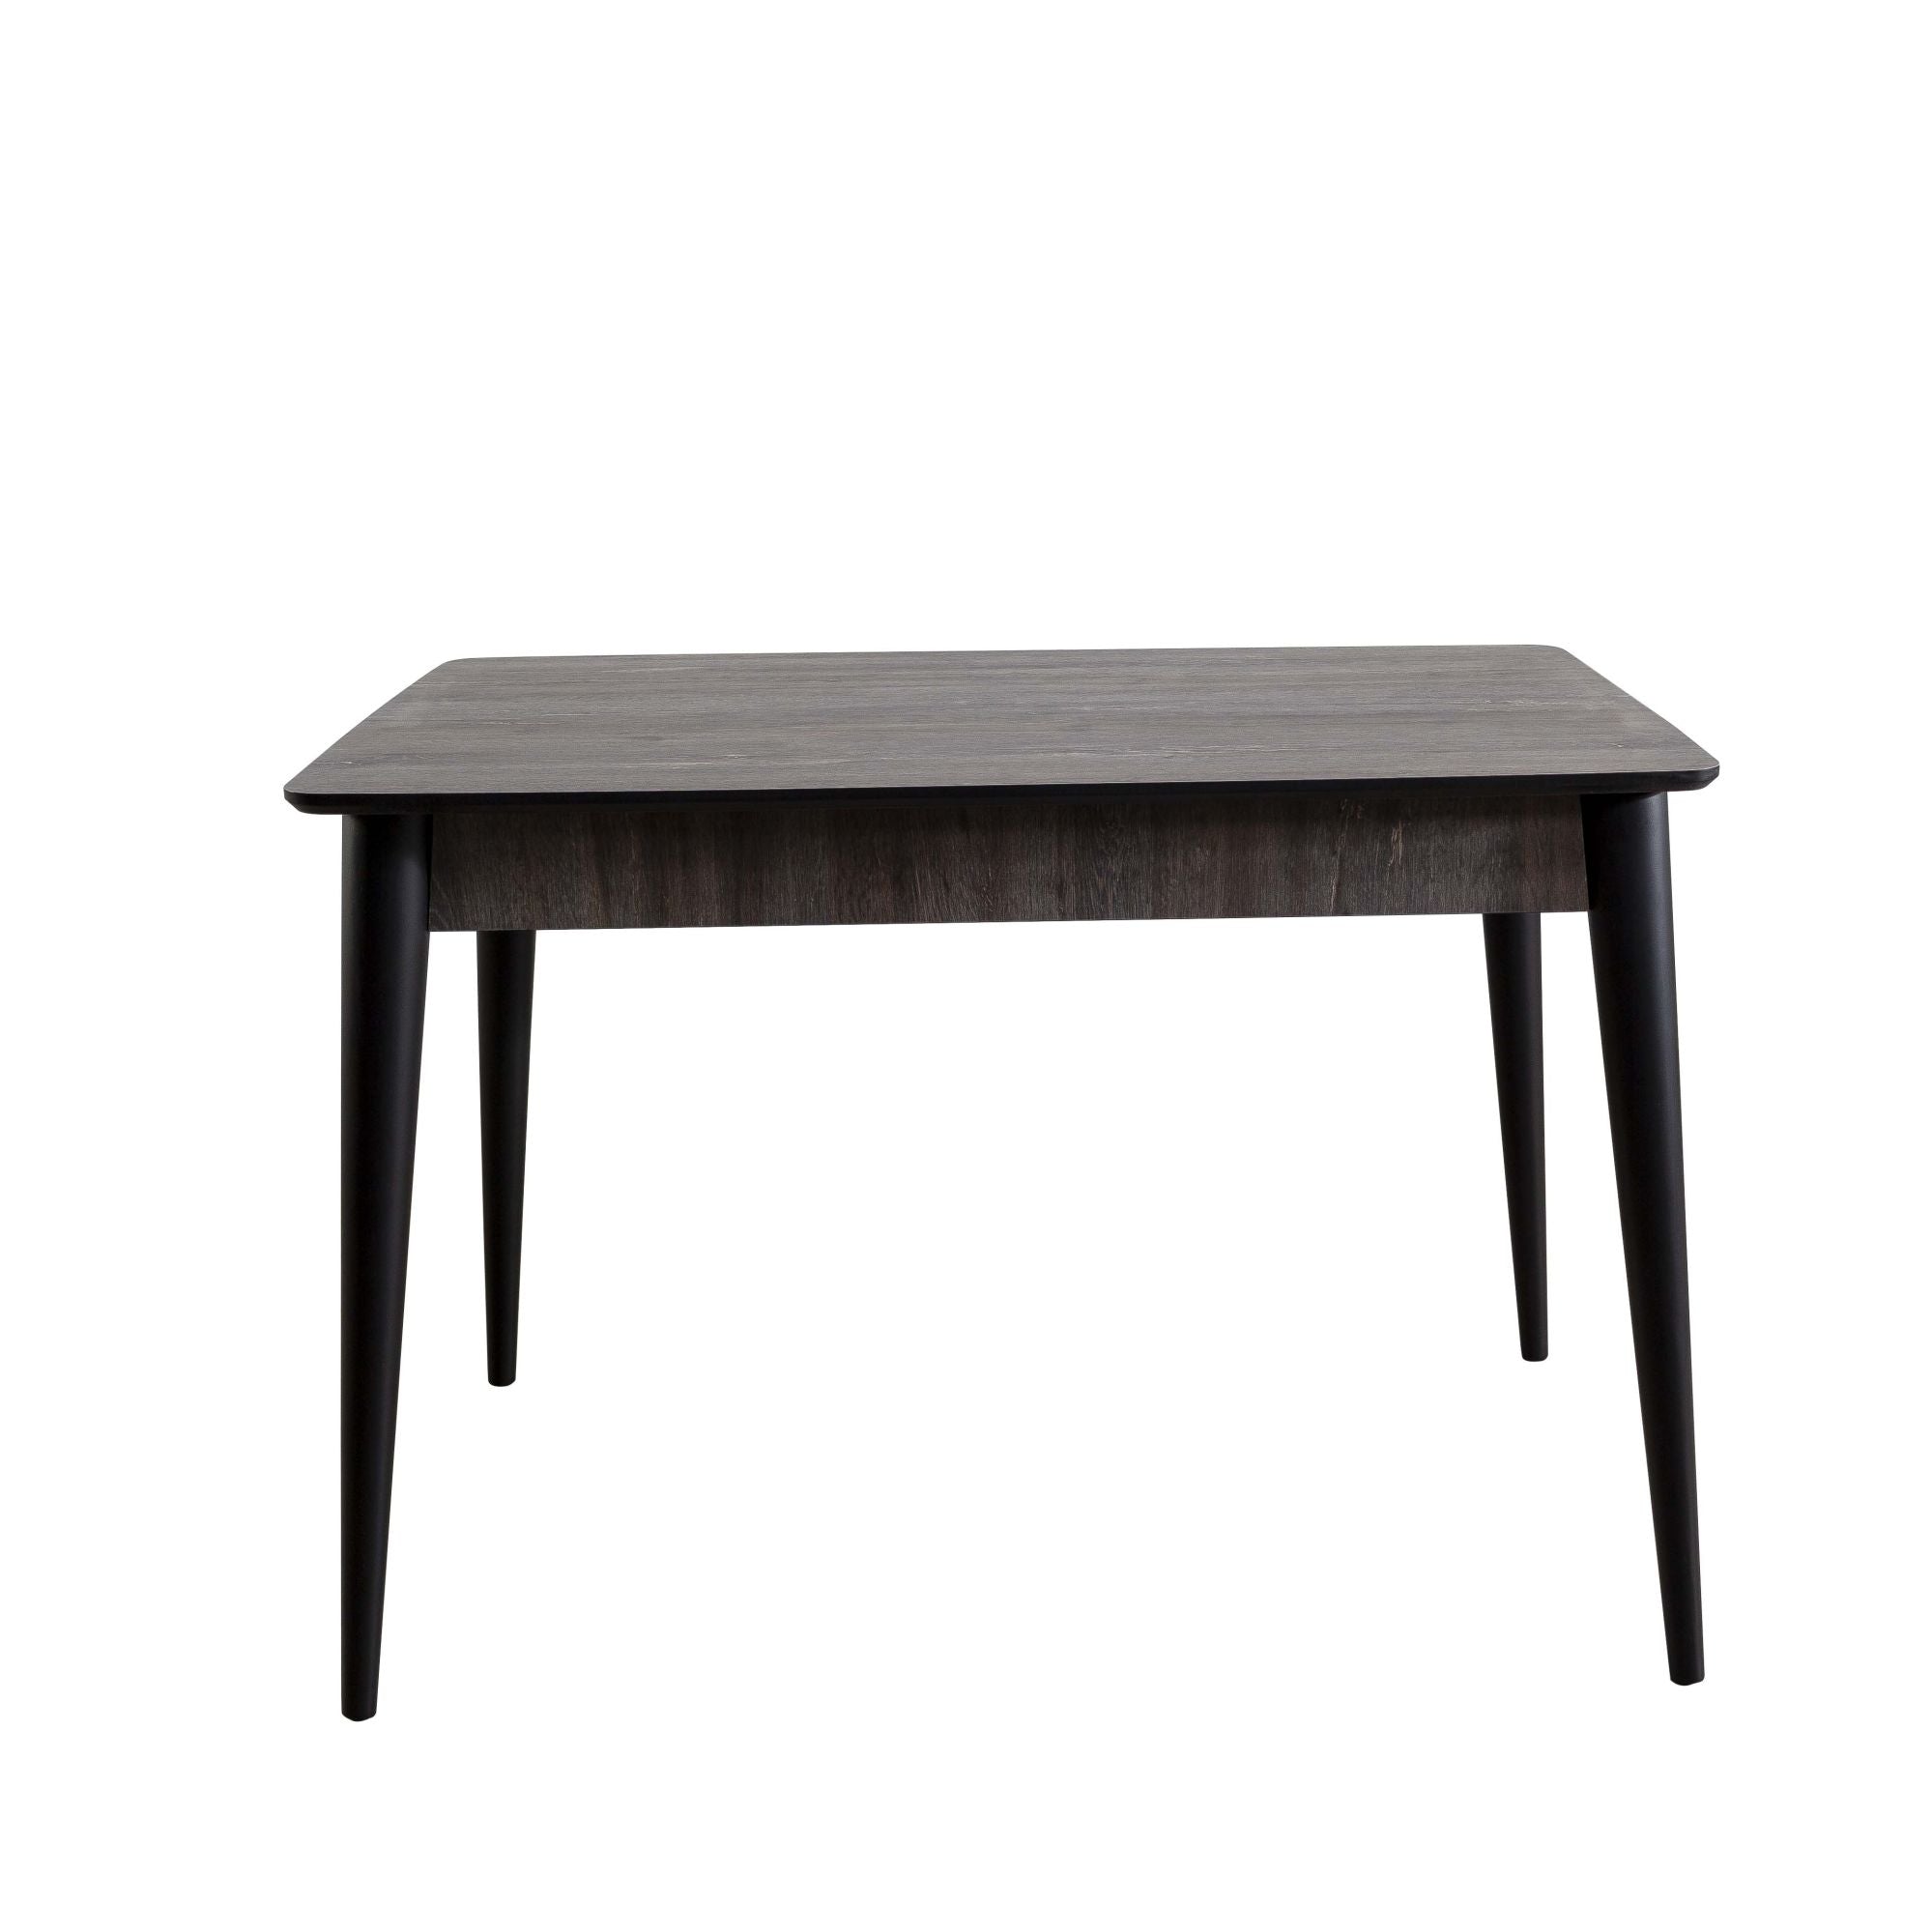 43' Modern Dining Table Rectangular Top with Solid Wood Leg